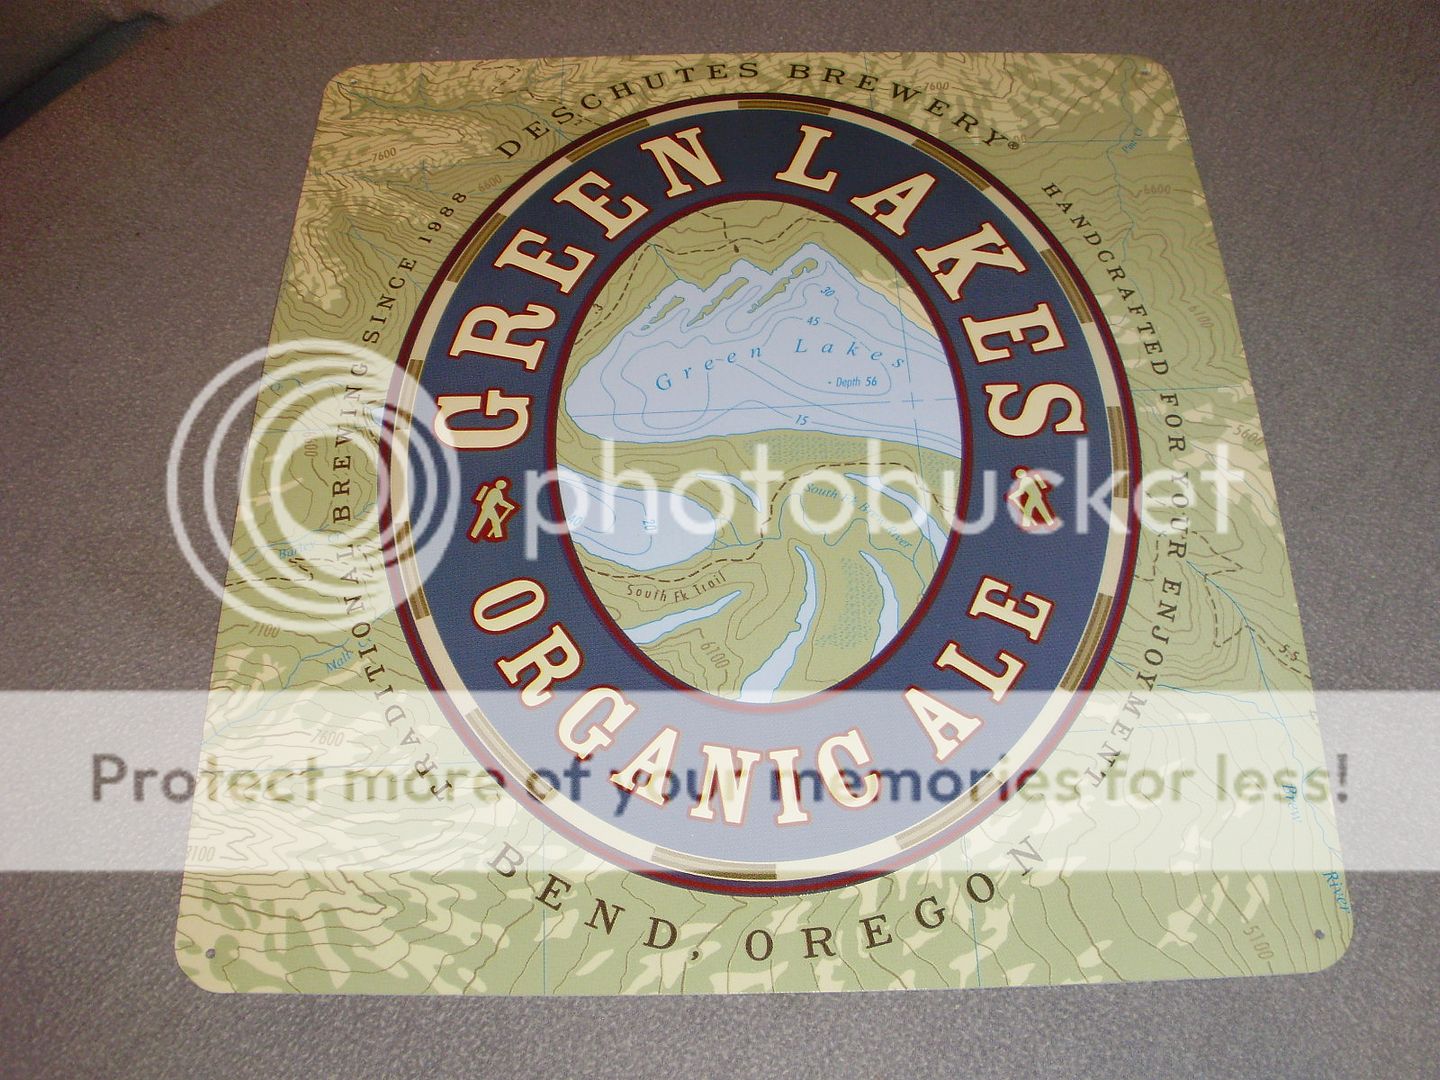 NEW DESCHUTES BREWERY GREEN LAKES ORGANIC ALE METAL BEER SIGN BEND 